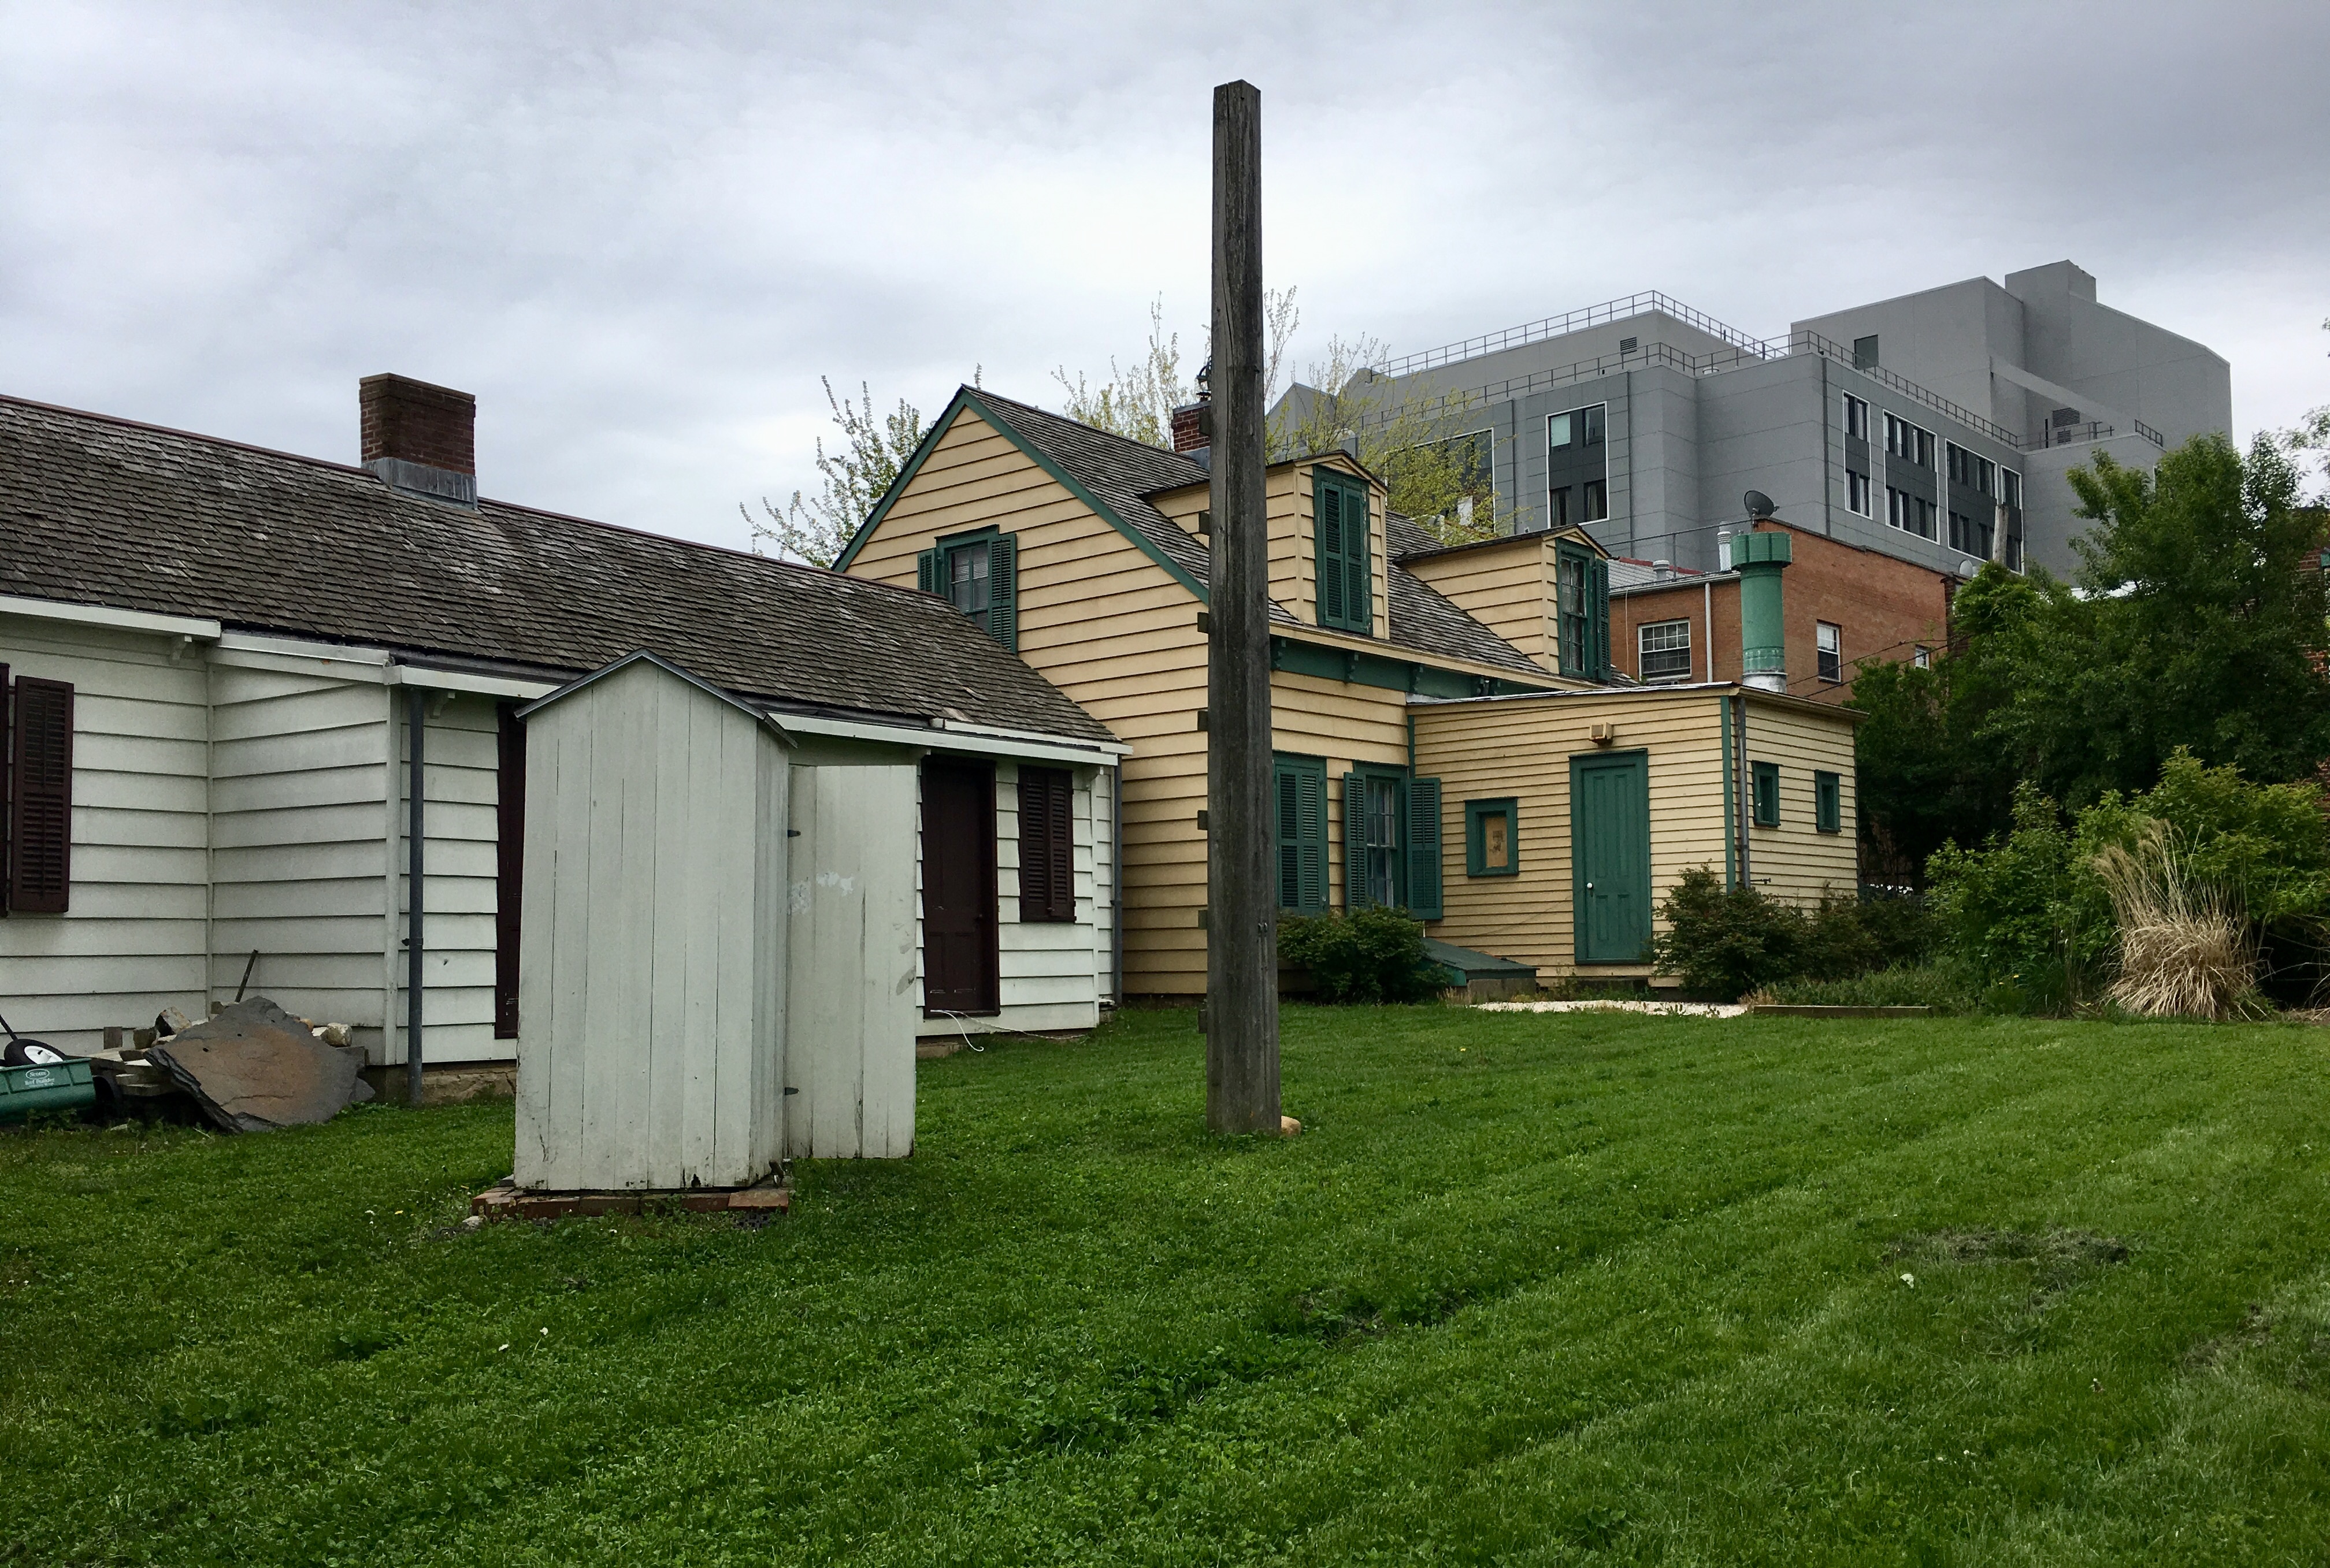 These are the rear facades of the Hunterfly Road Houses. Eagle photo by Lore Croghan